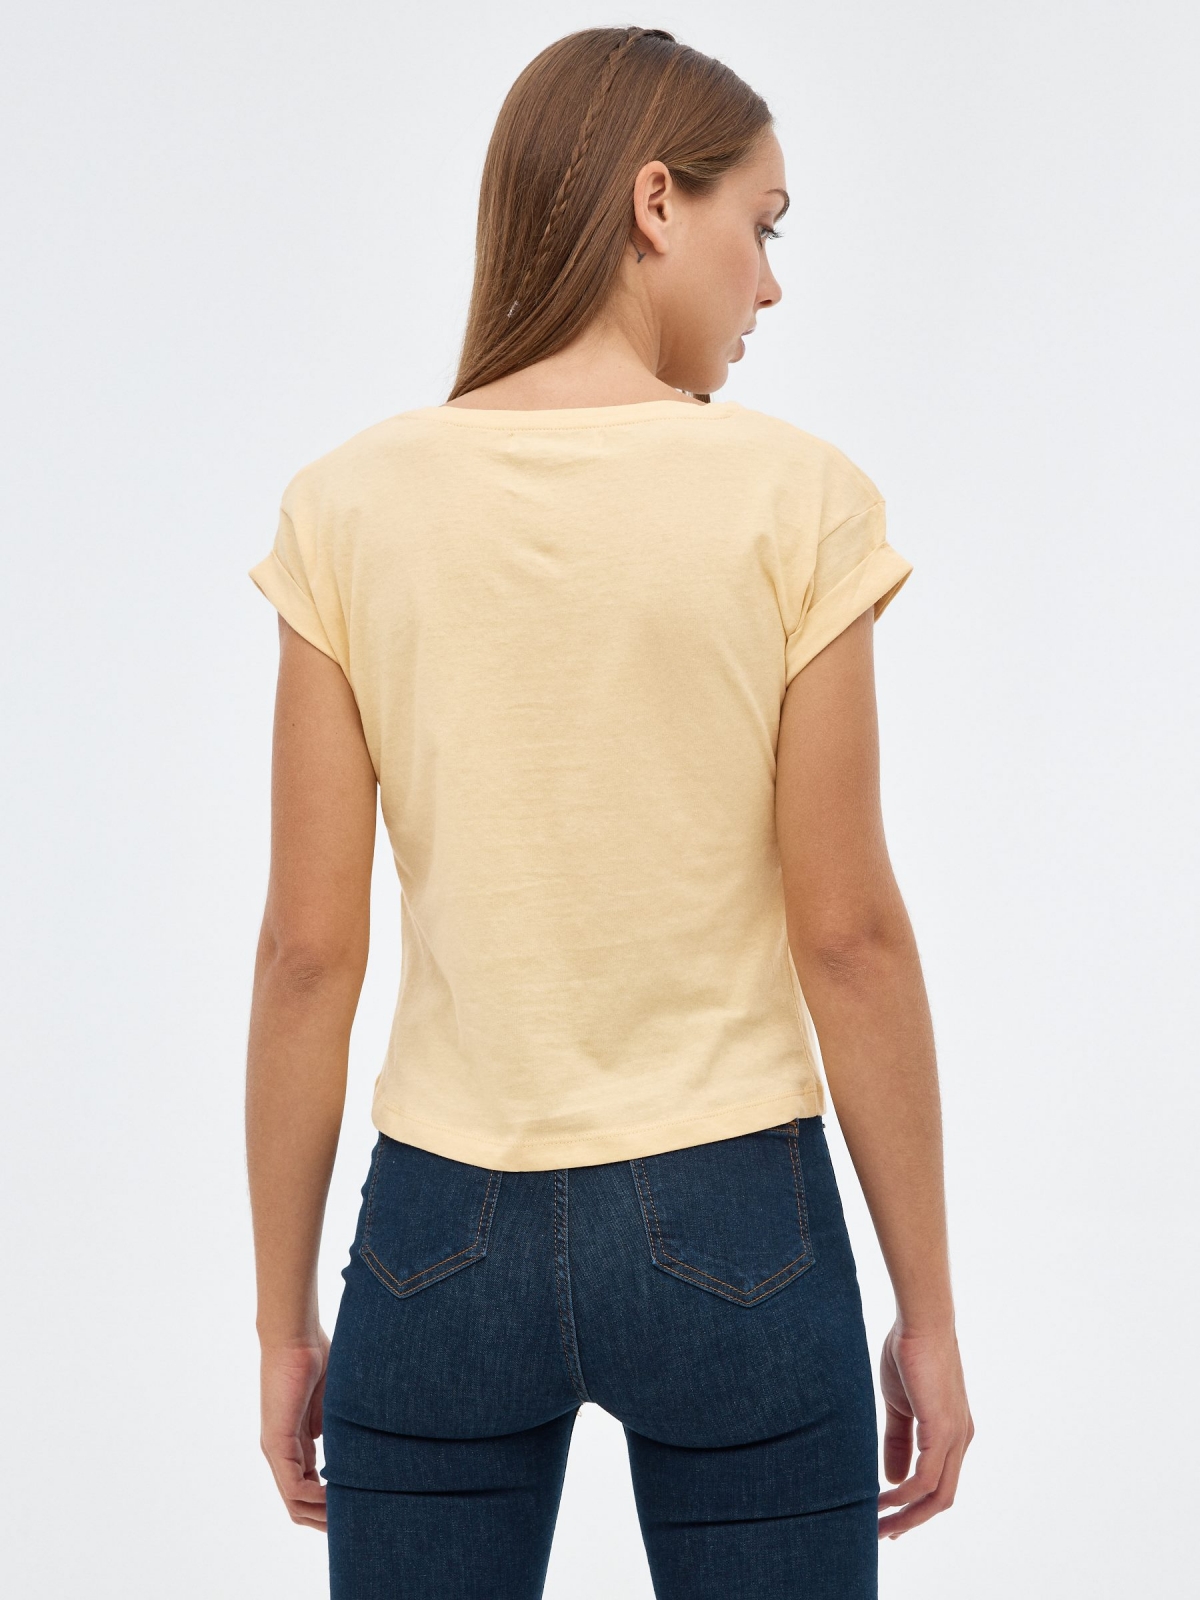 White T-shirt with print vanilla middle back view